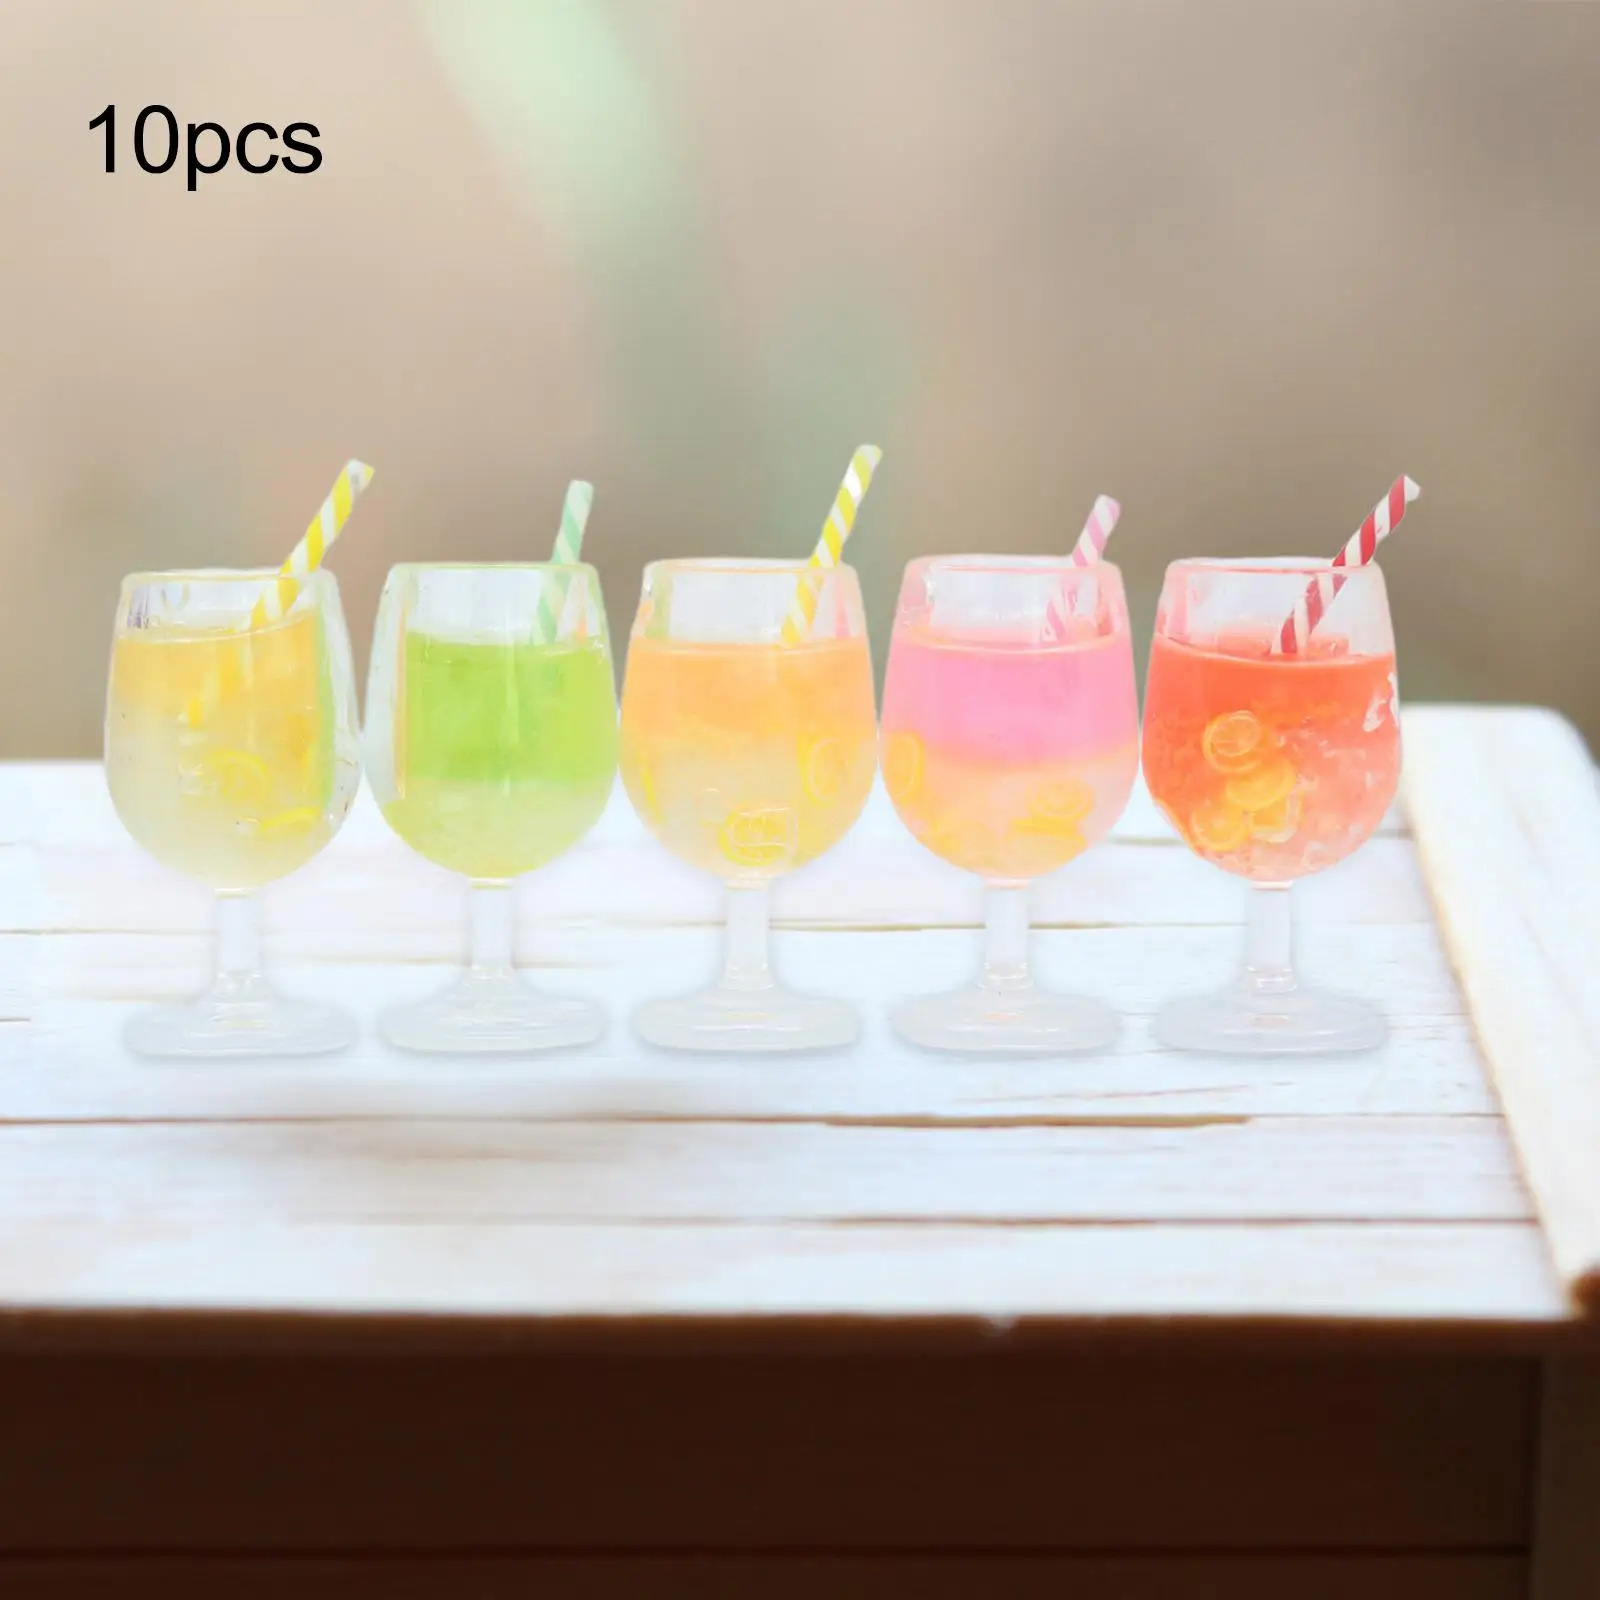 

10Pcs 1/12 Dollhouse Drink Cup Diorama Scenery Charm Pendants for DIY Projects Building Fairy Garden DIY Scenery Railway Station